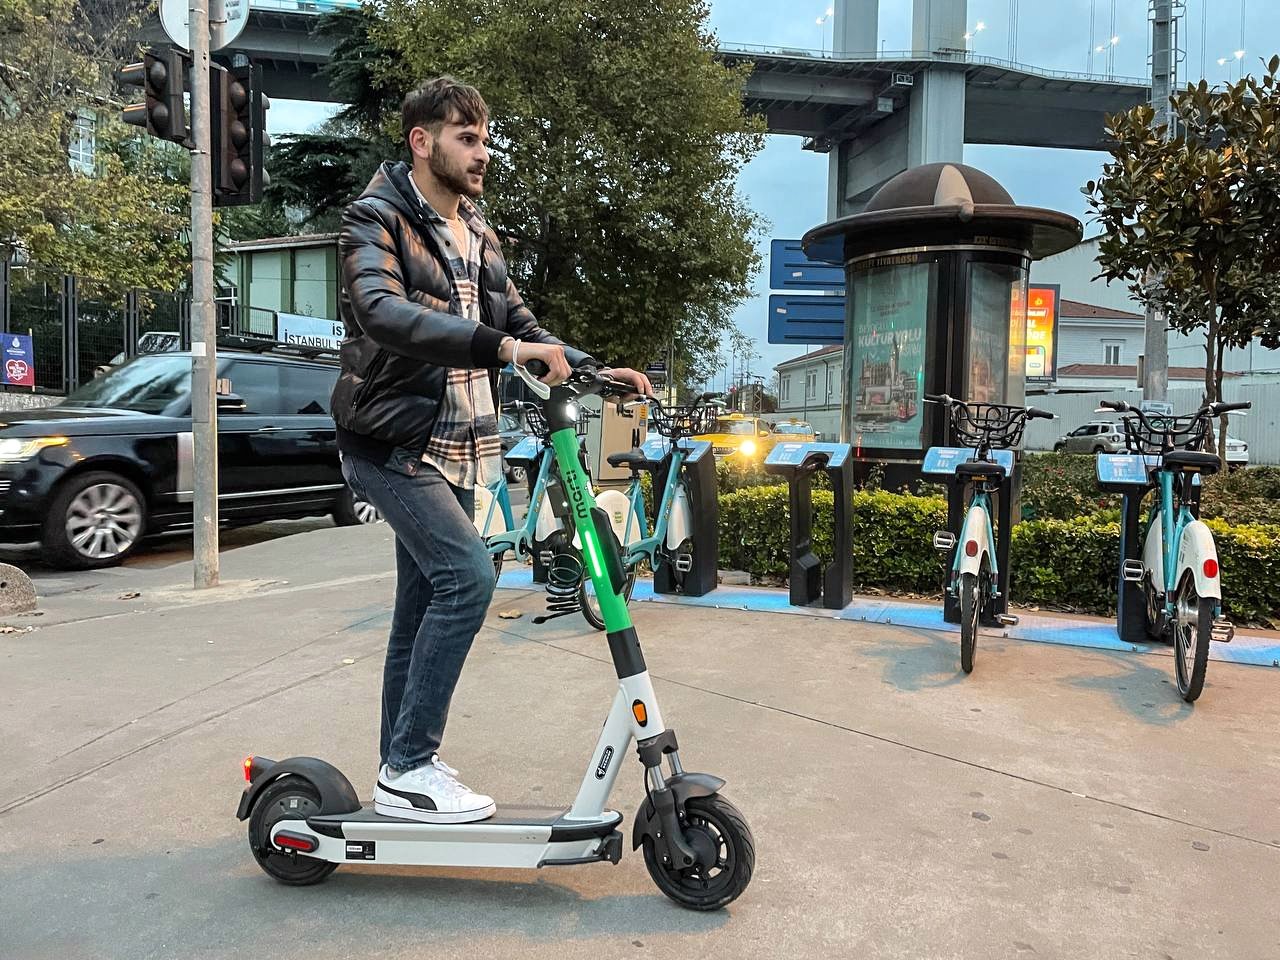 253 electric scooter users fined in 7 months in Istanbul | Daily Sabah